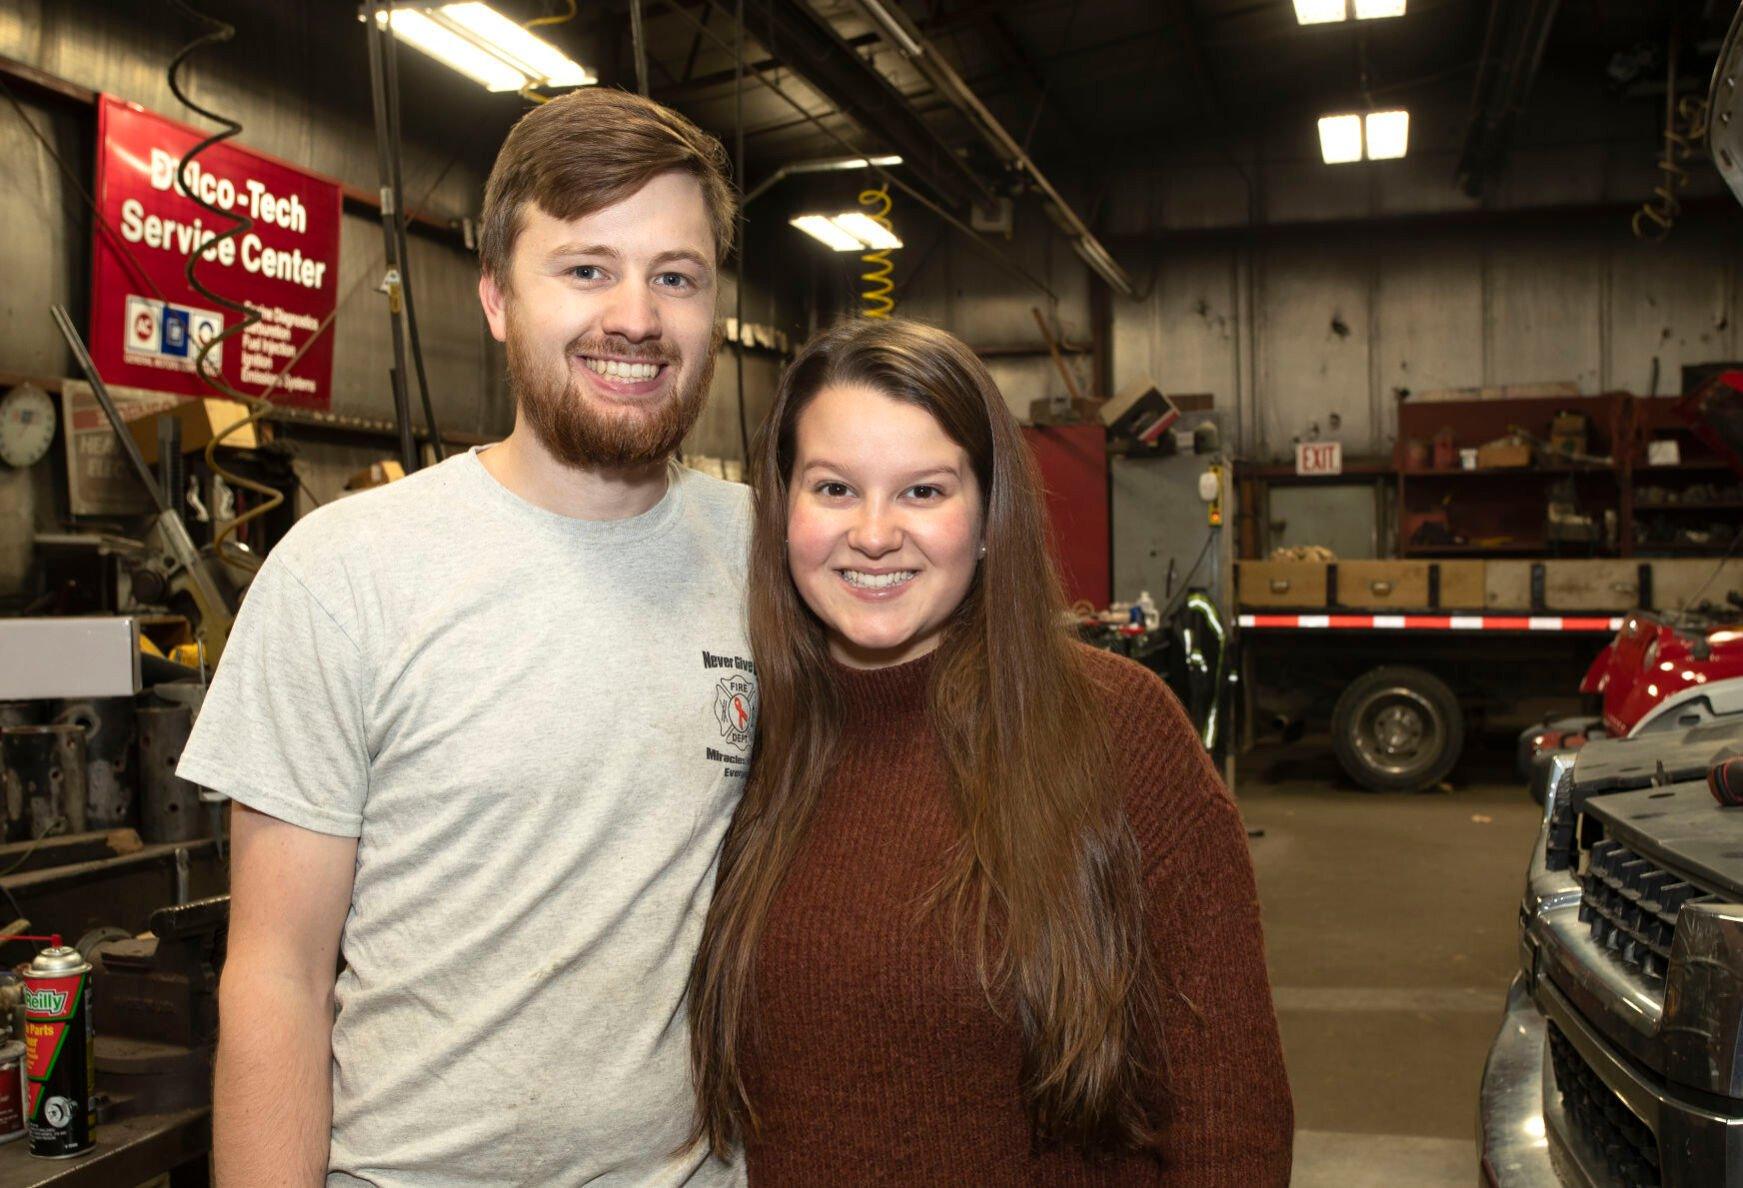 The new owners of Sheehan Auto, Luke and Emma Steele, in their shop in East Dubuque, Ill., on Monday.    PHOTO CREDIT: Stephen Gassman